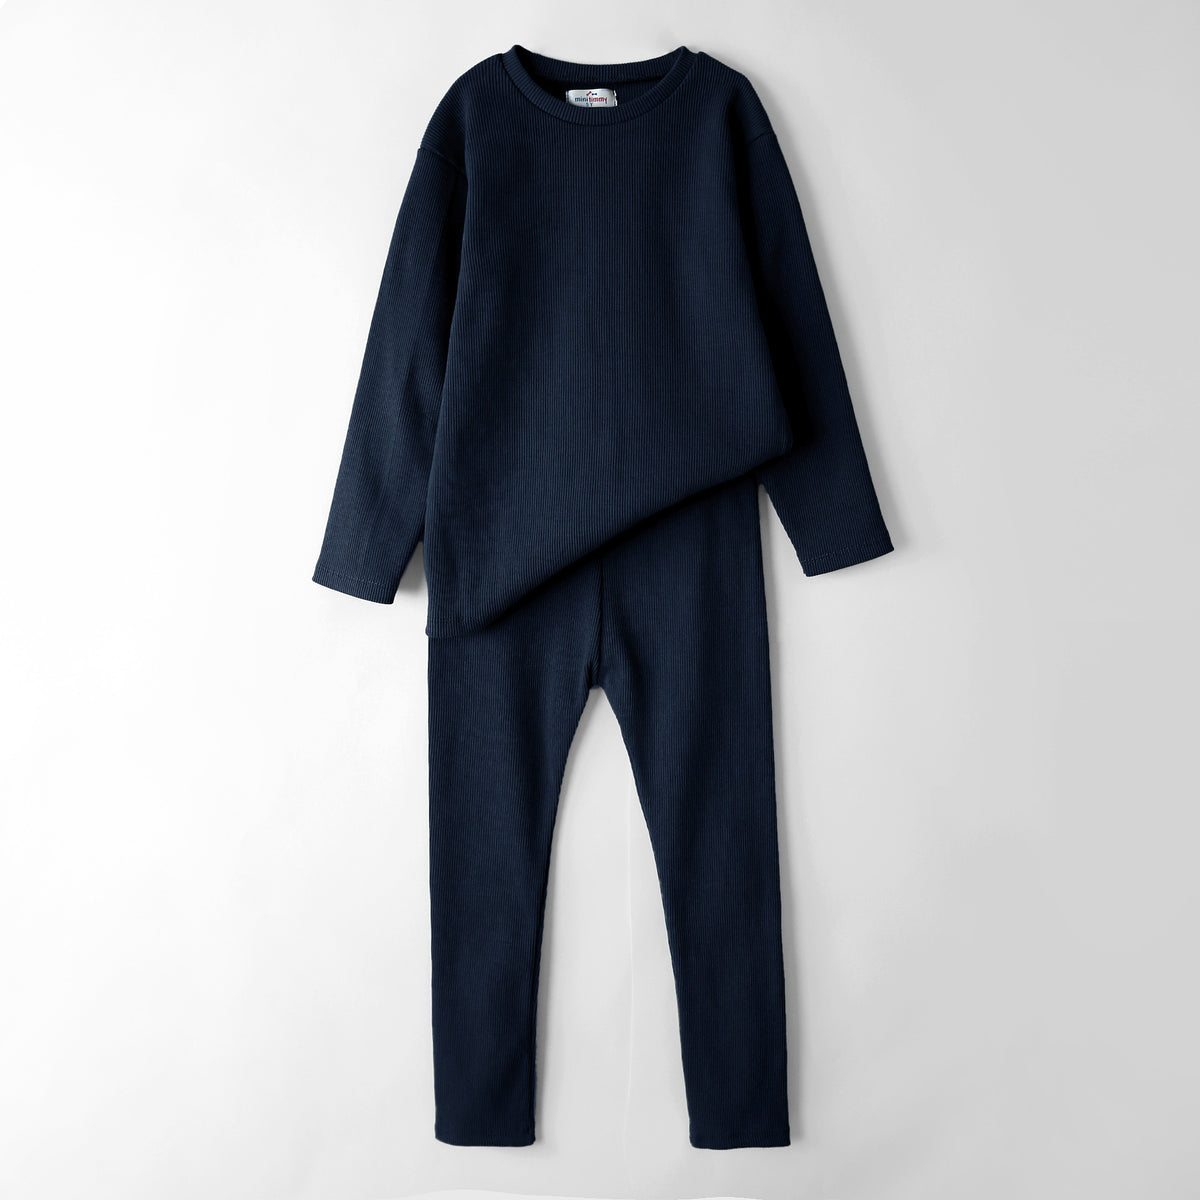 Premium Quality 2 Piece Navy Winter Tracksuit For Kids